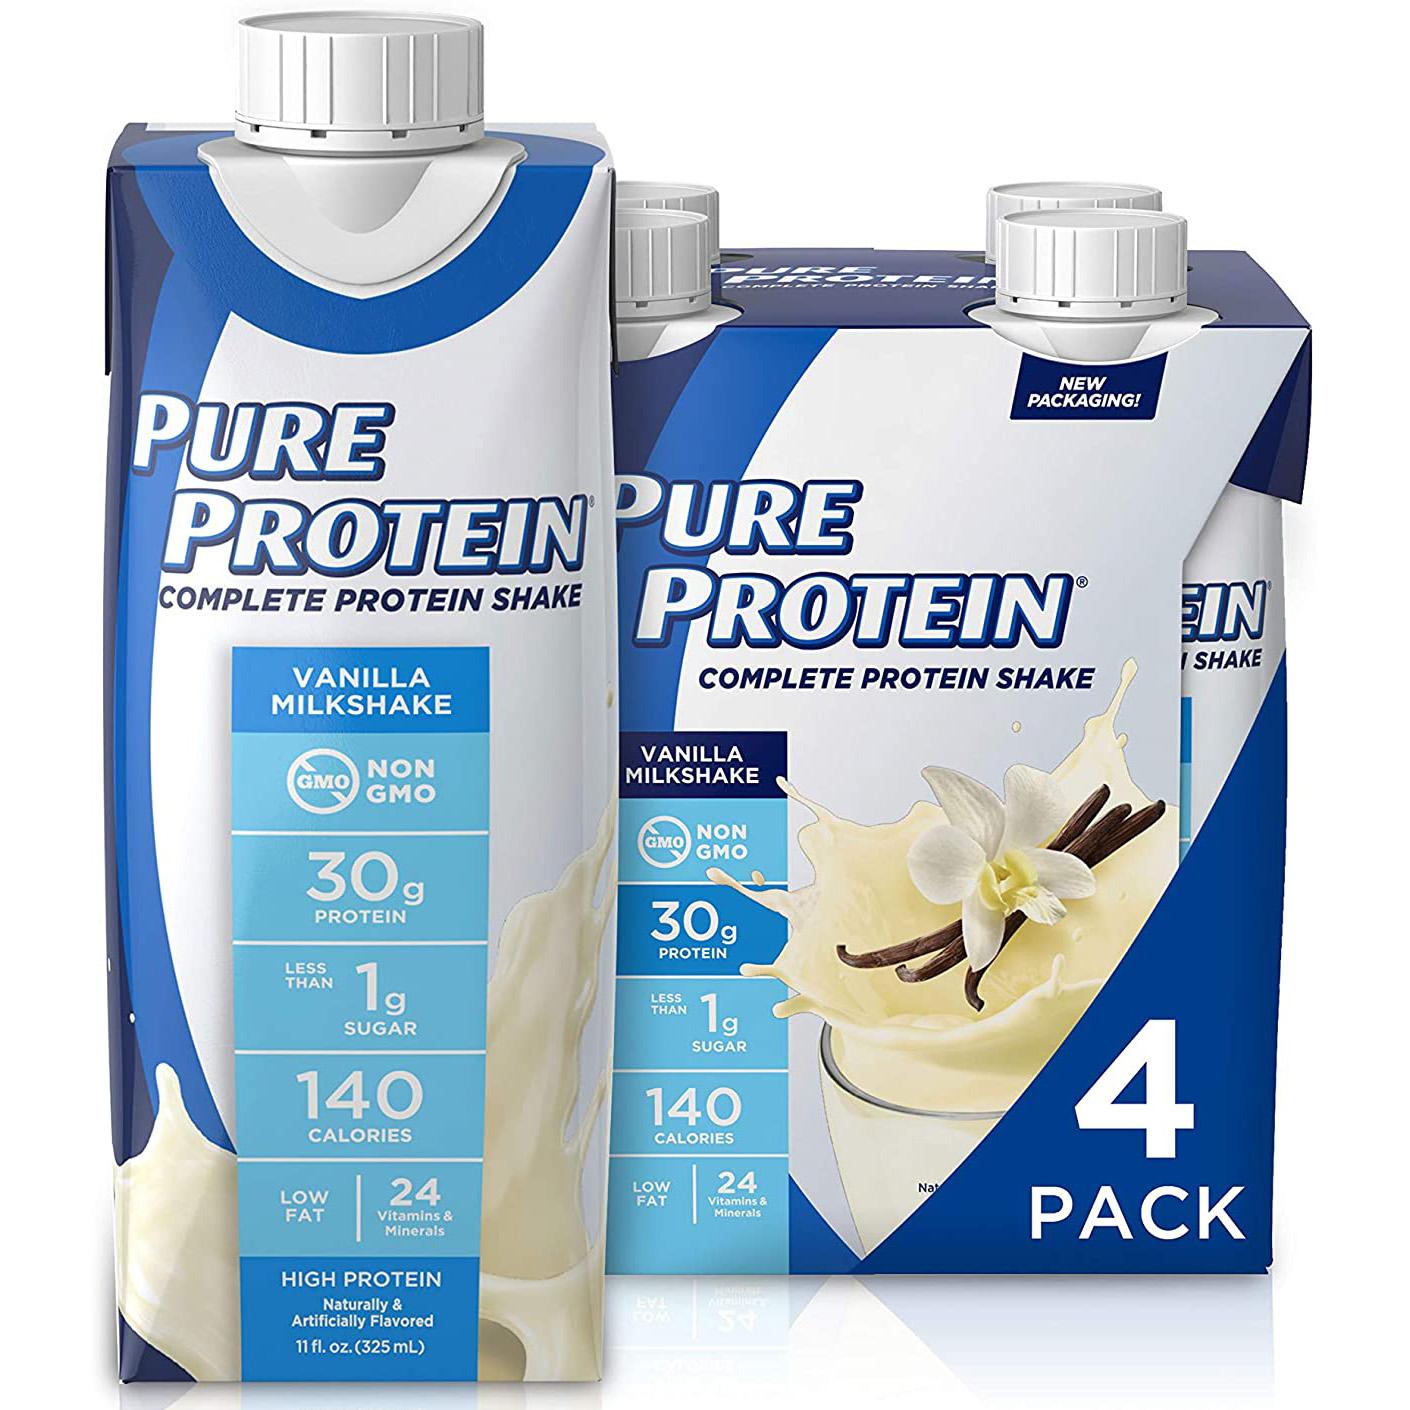 4 Pure Protein Complete Ready to Drink Shakes for $4.89 Shipped